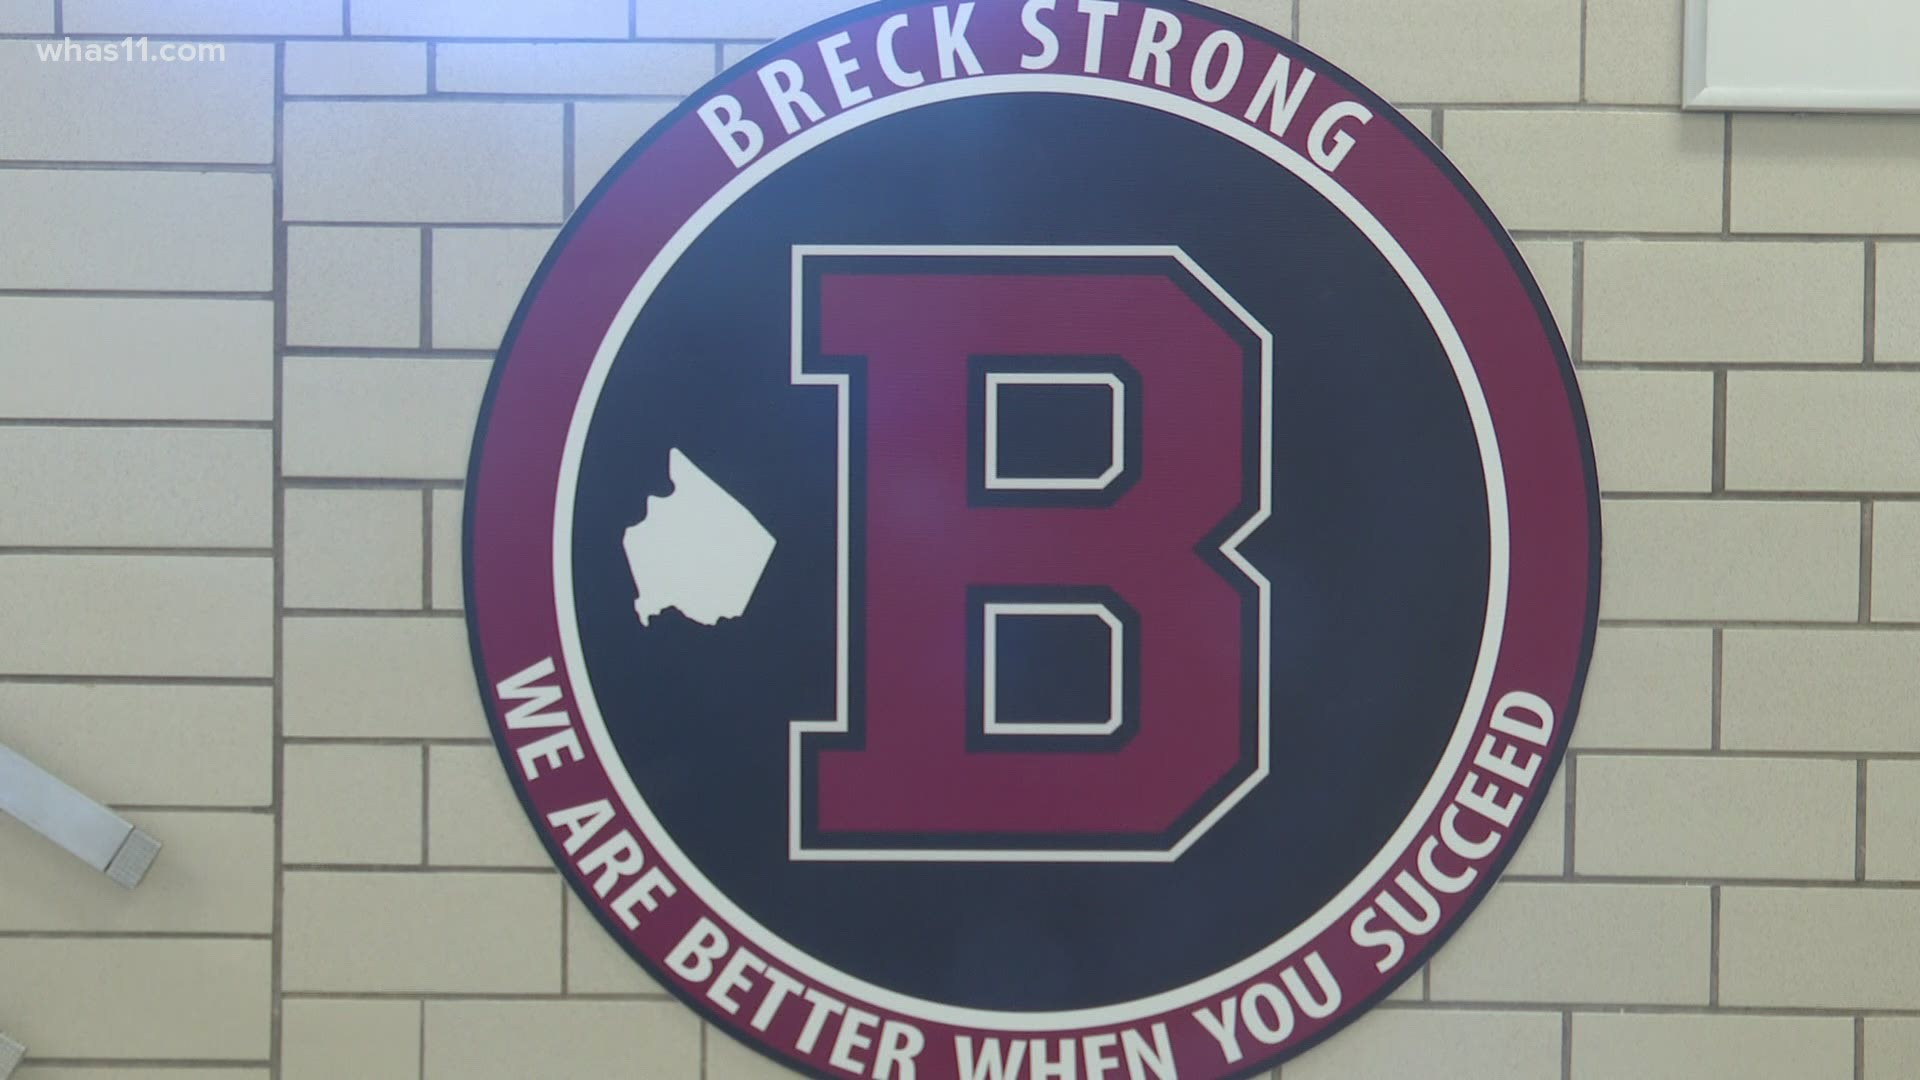 Breckinridge County Middle School was built in 1964—and teachers and faculty have made the building work but say it's time for major upgrades.